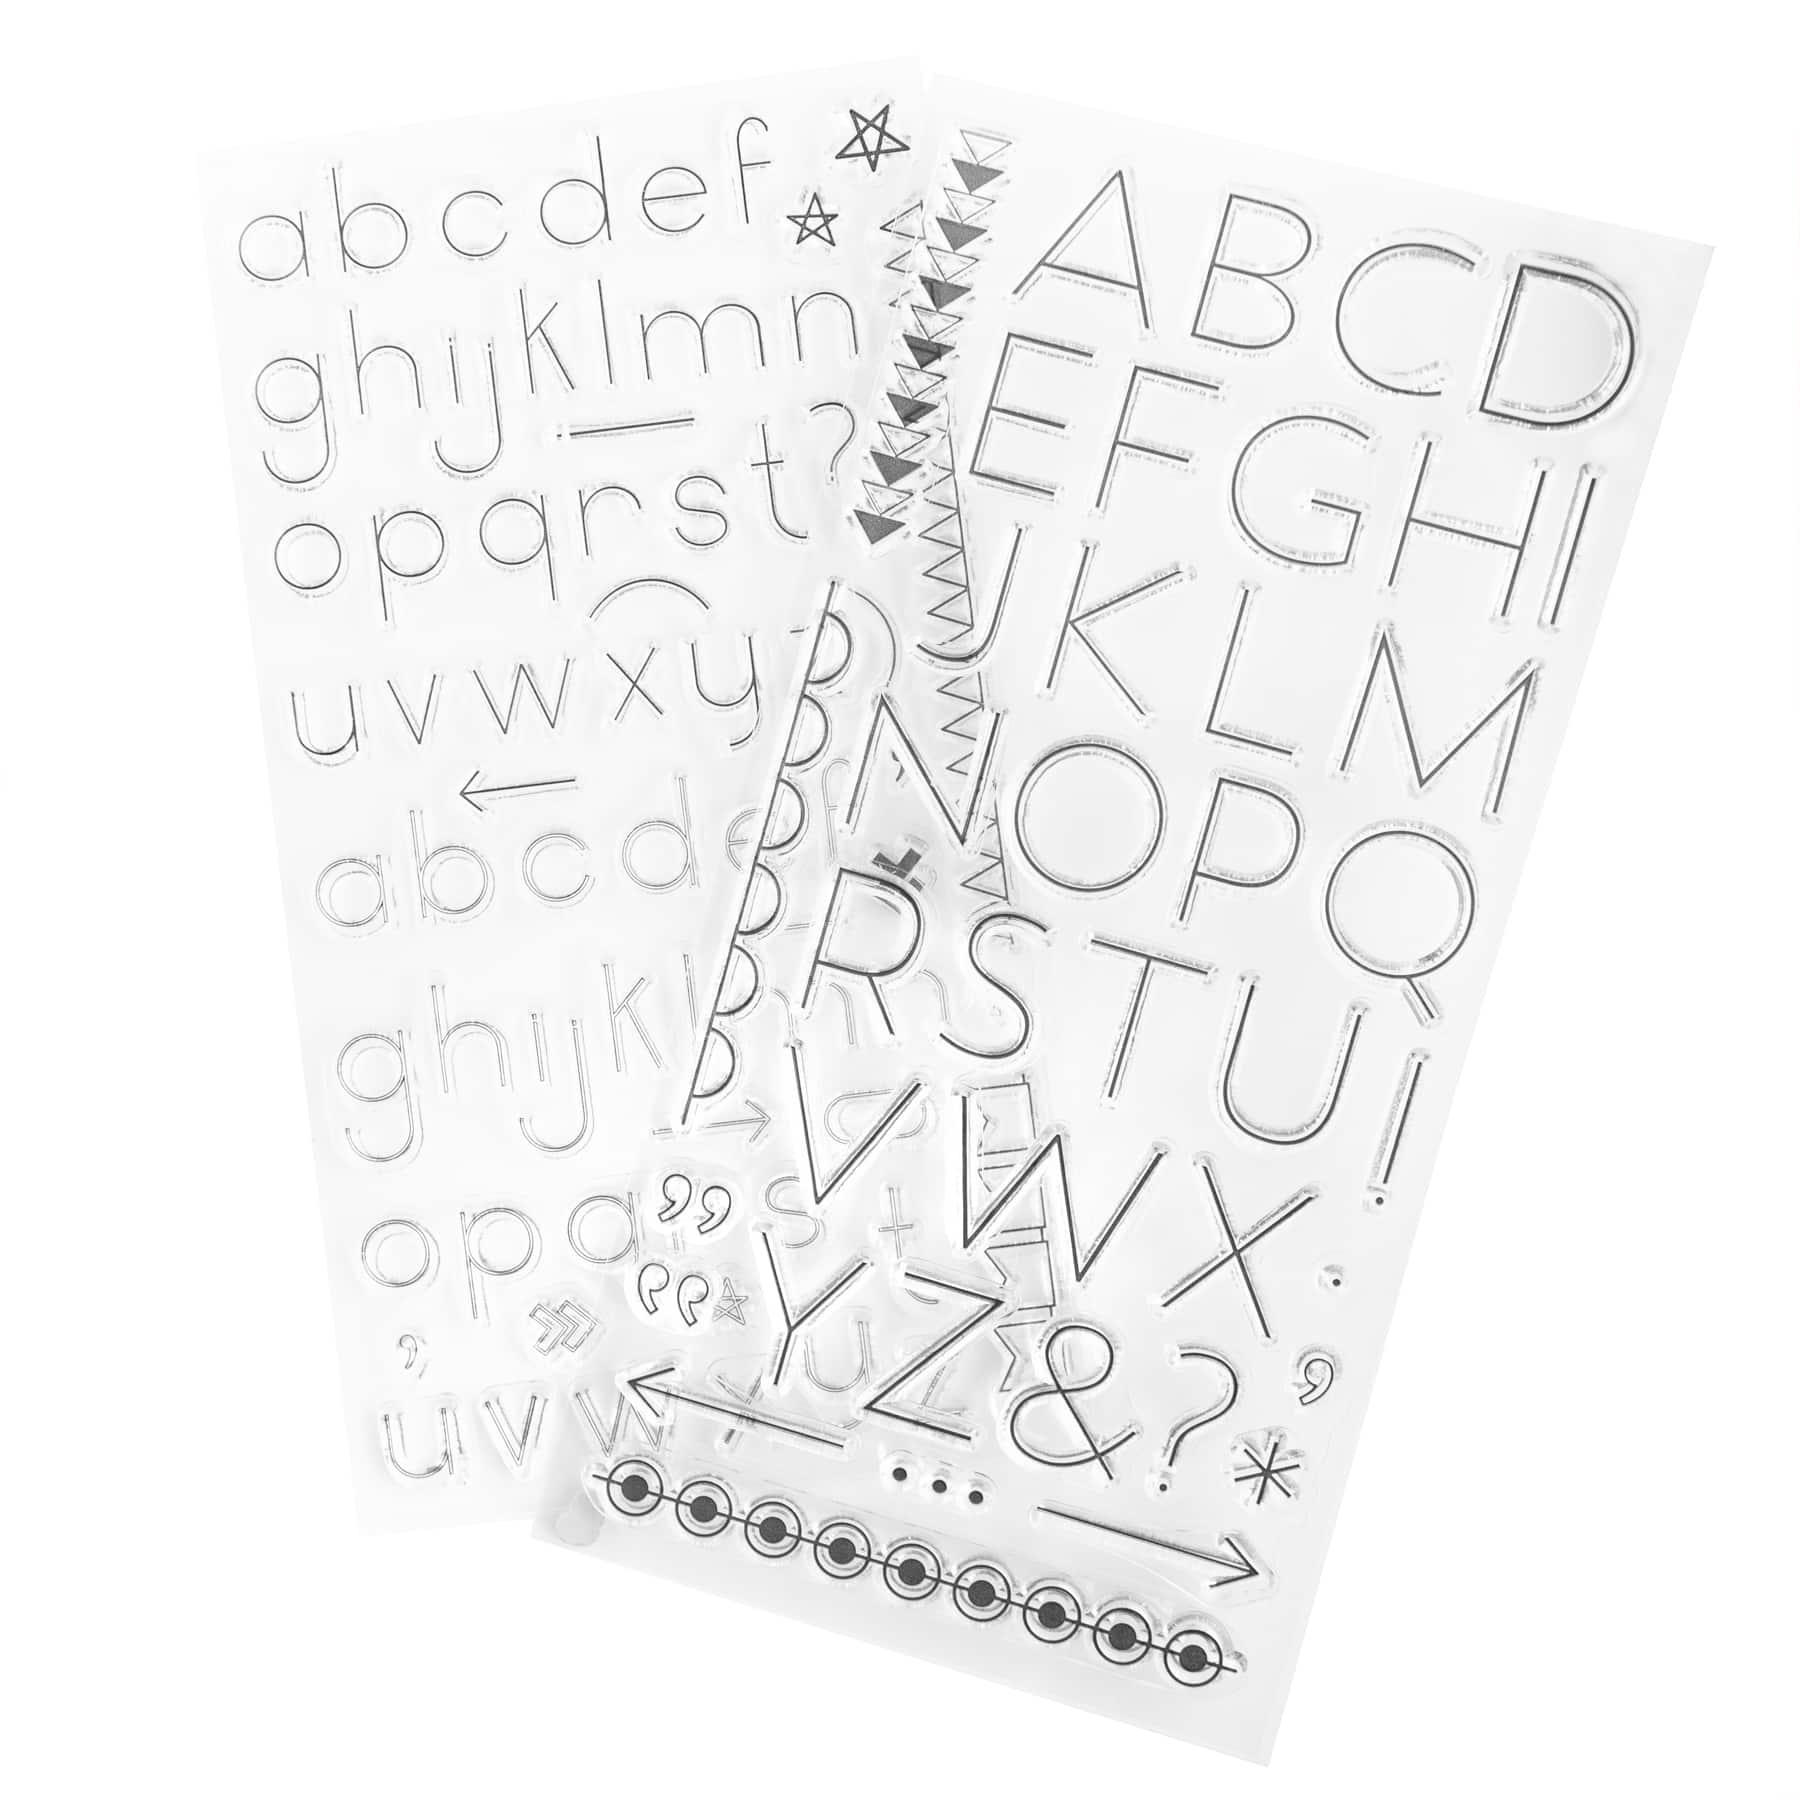 Star Wood Stamp by Recollections™